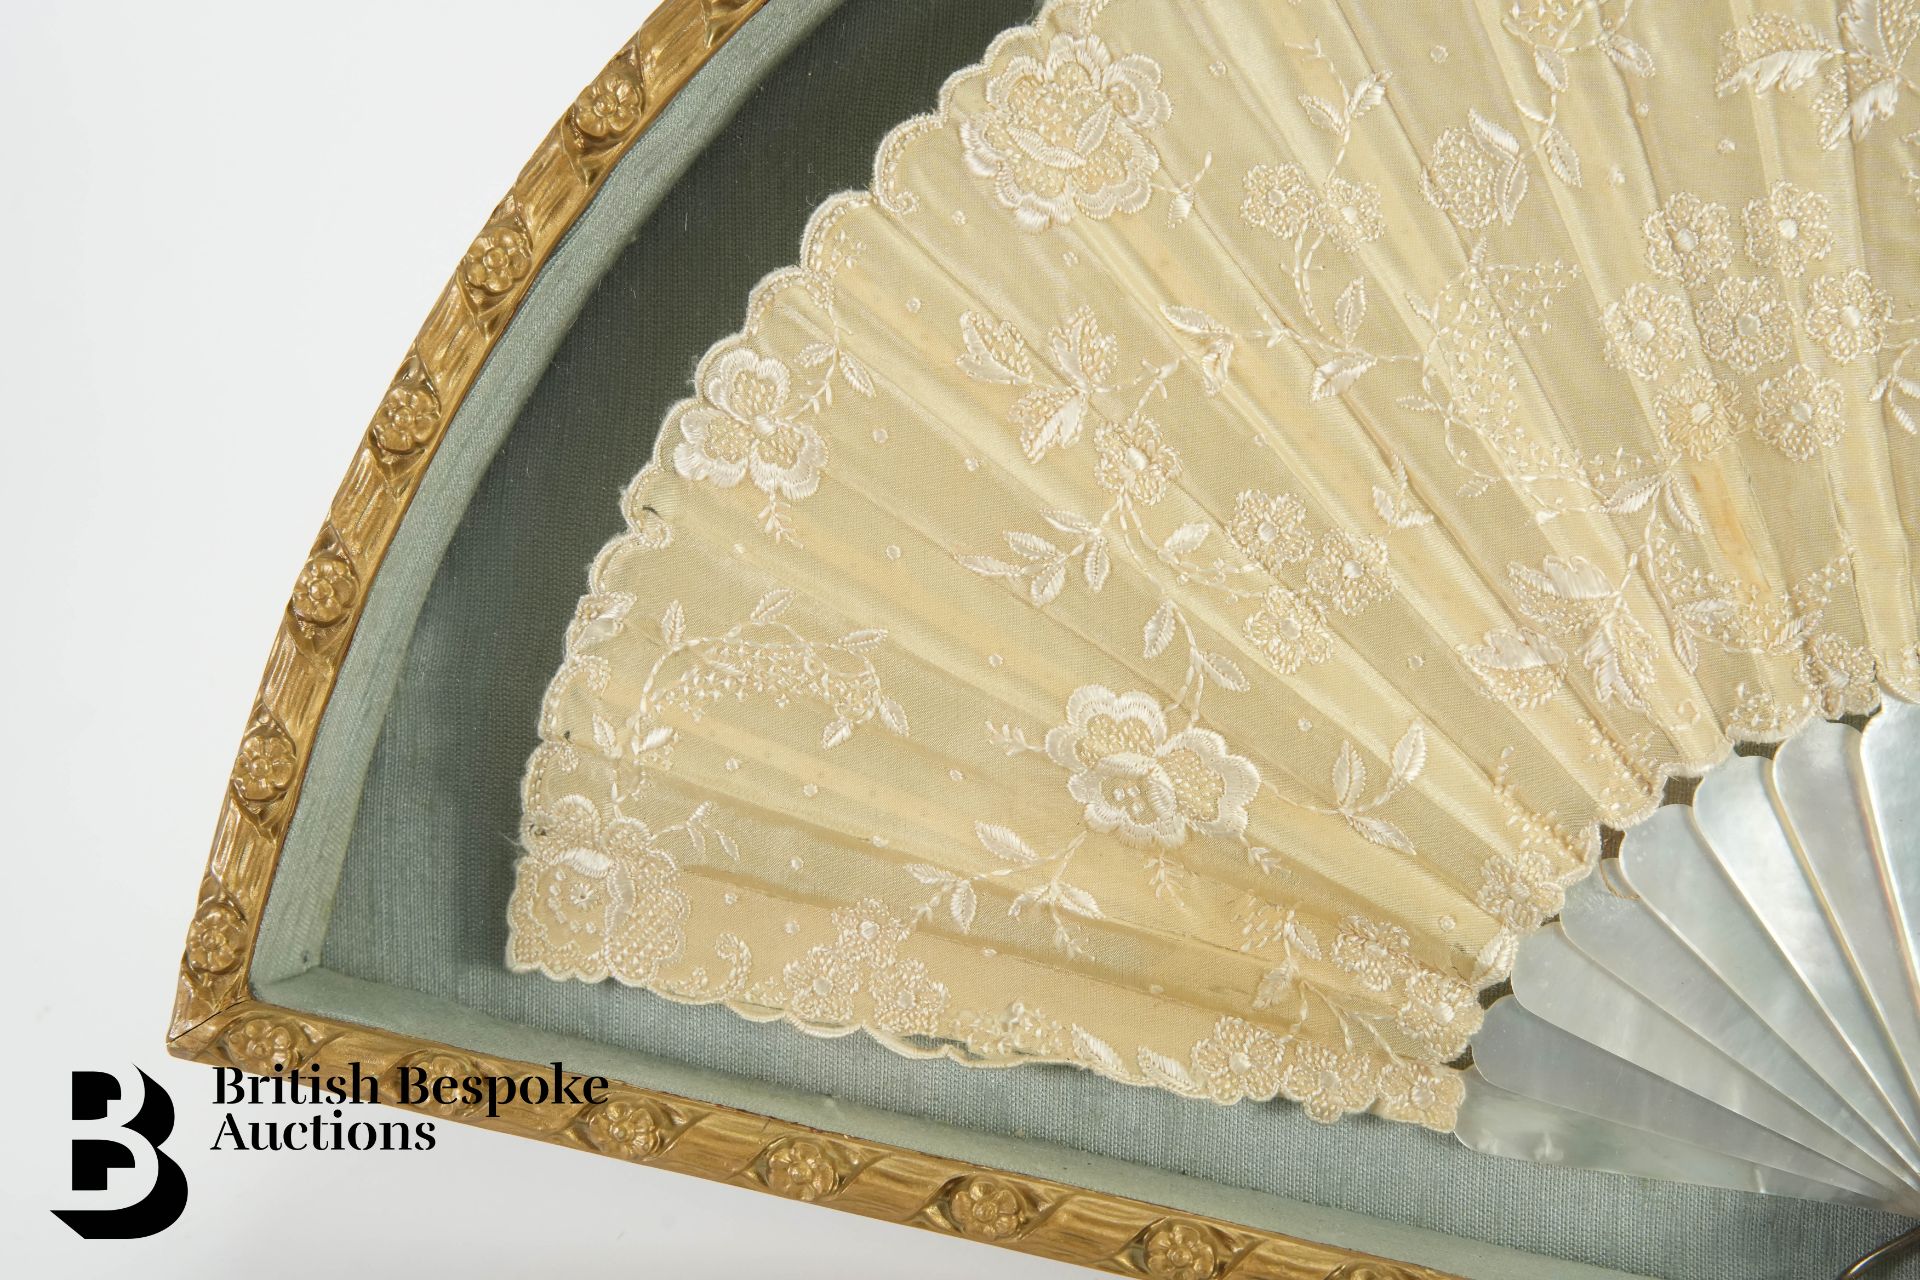 Late 19th Century Silk Embroidered Fan - Image 4 of 5